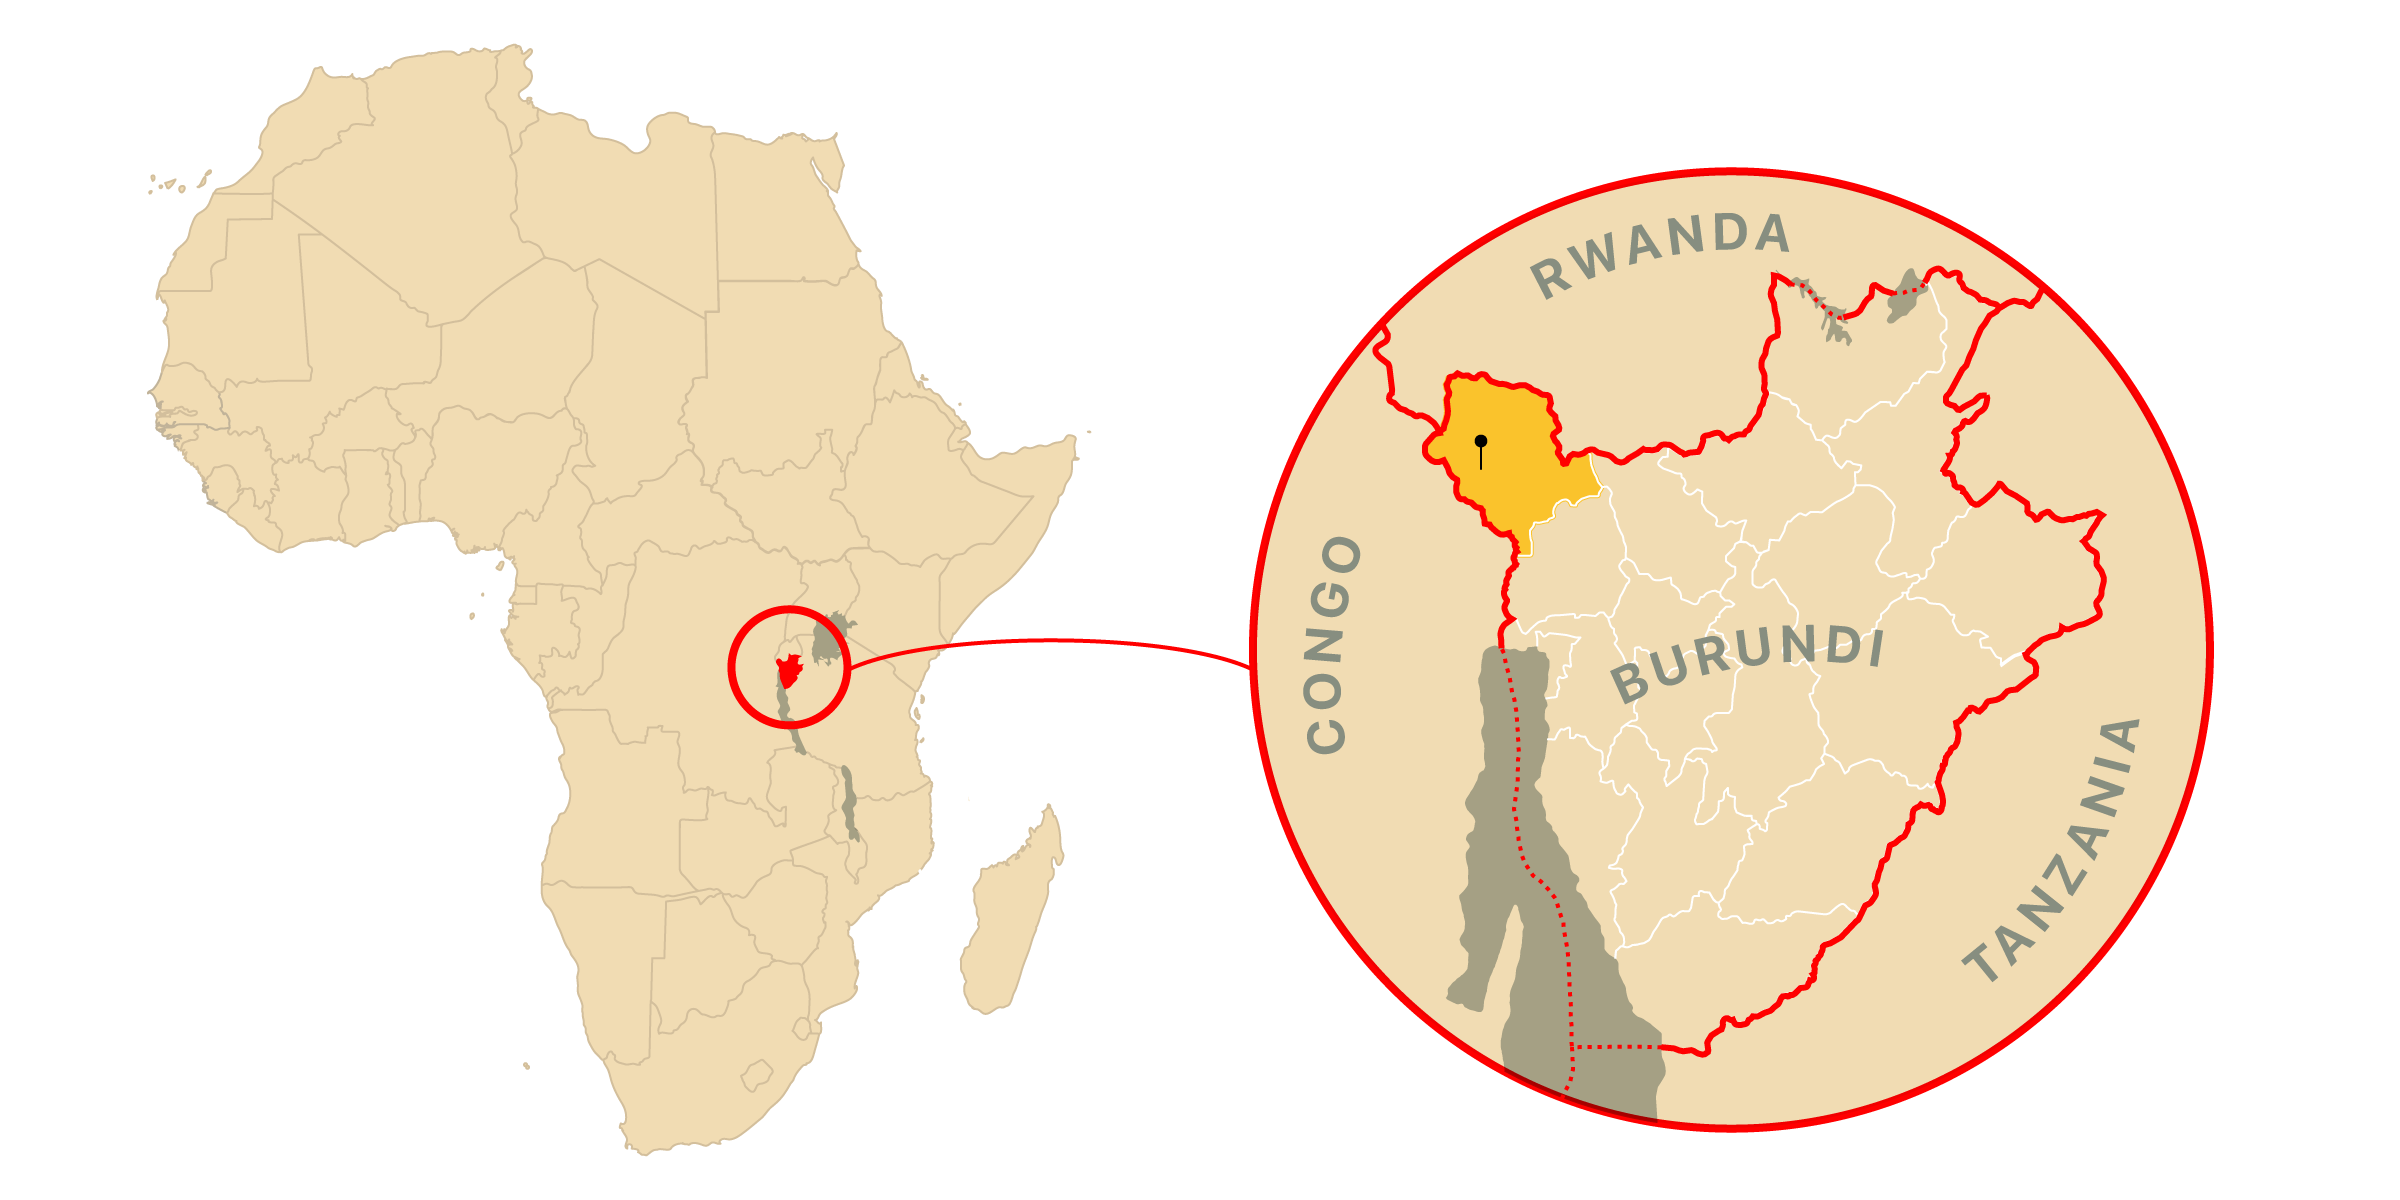 A map showing the location of Ubuntu Clinique and the country of Burundi within Africa